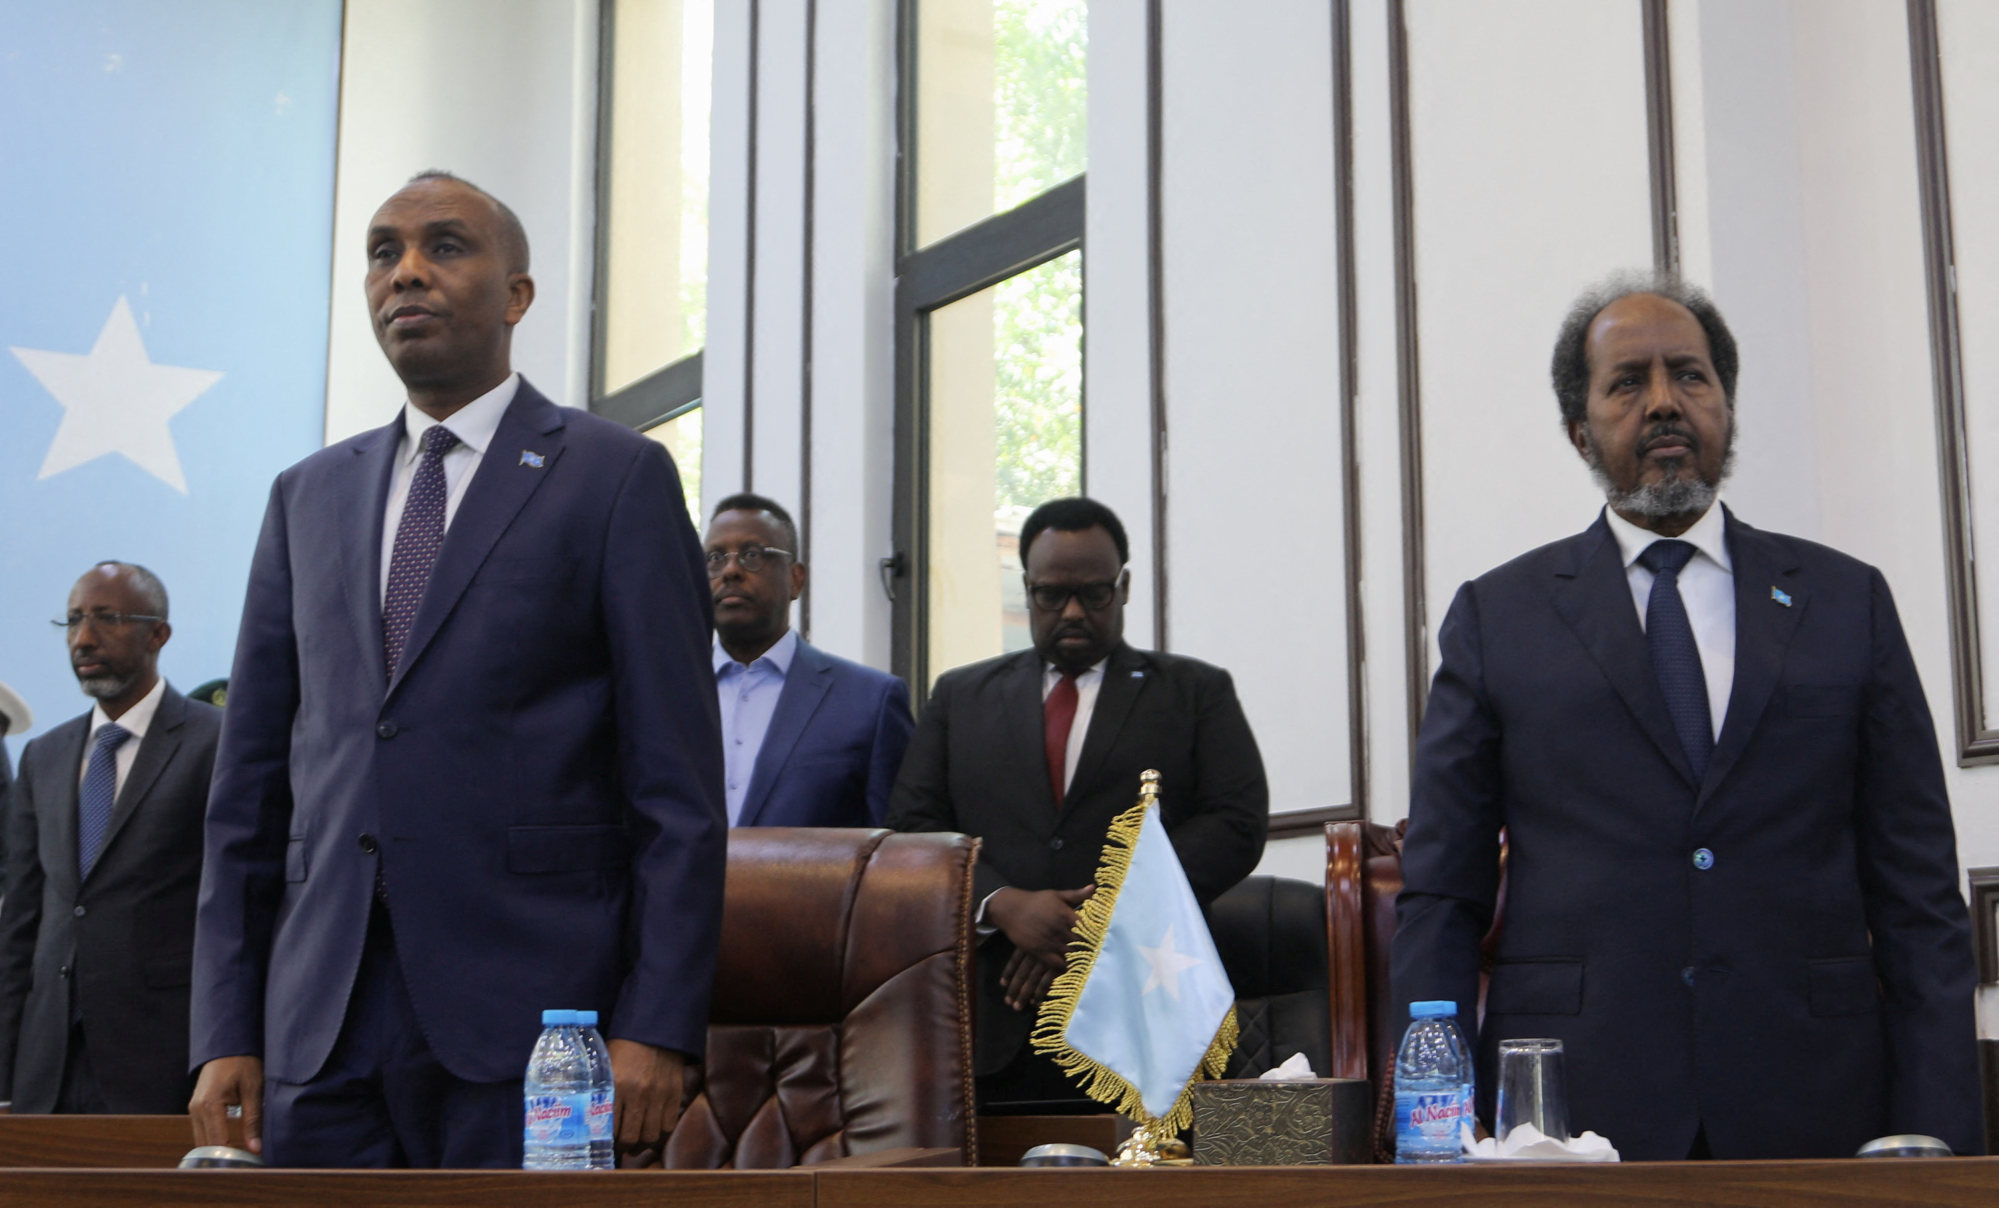 Ethiopia Deal With Breakaway Somaliland Region Sparks Row With Somalia South China Morning Post